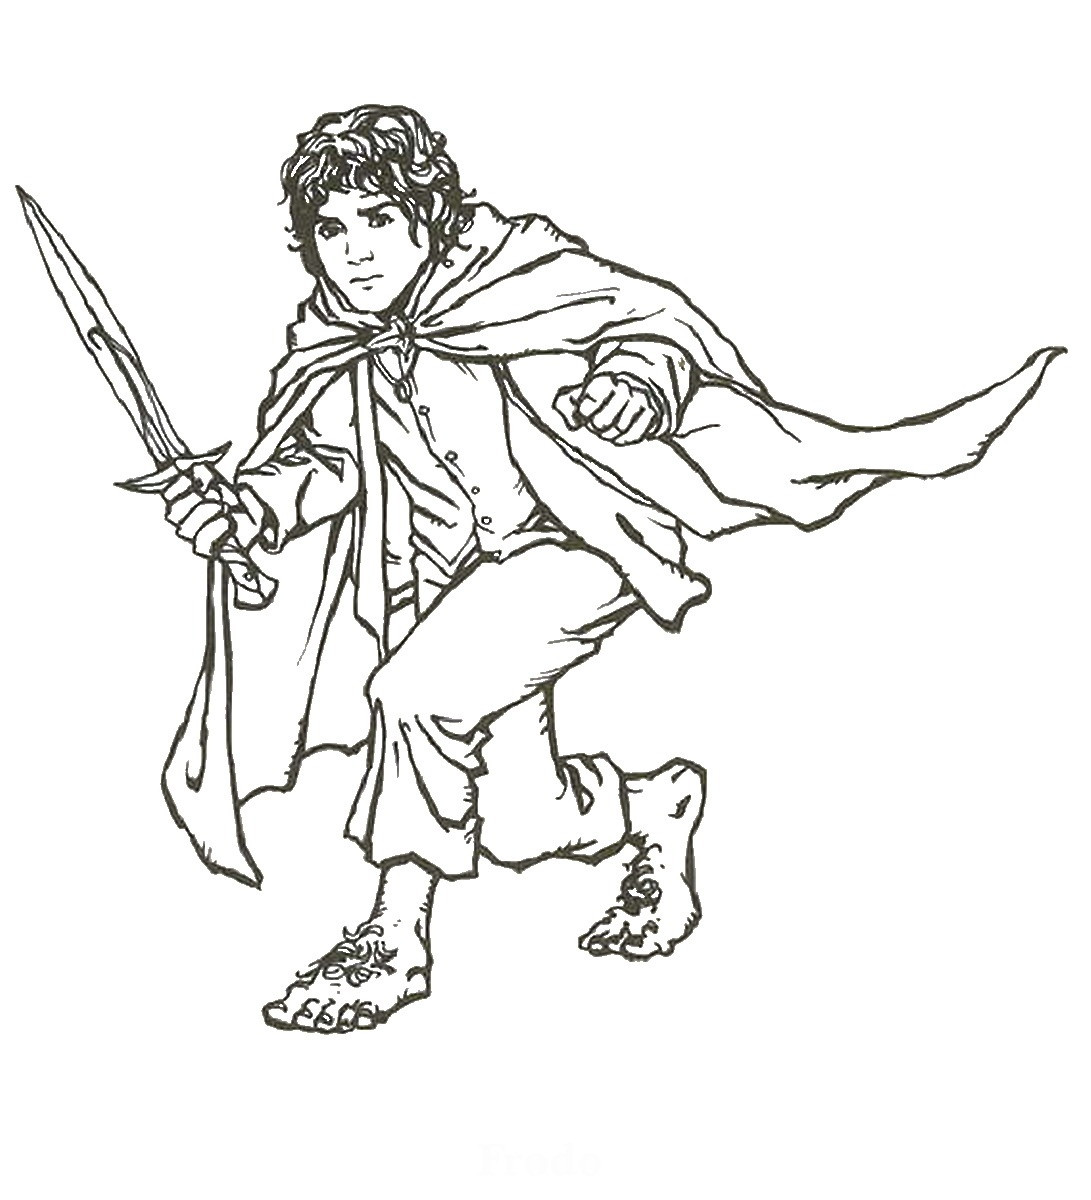 Lord Of The Rings Coloring Book
 Free Printable Lord of The Rings Coloring Pages For Kids